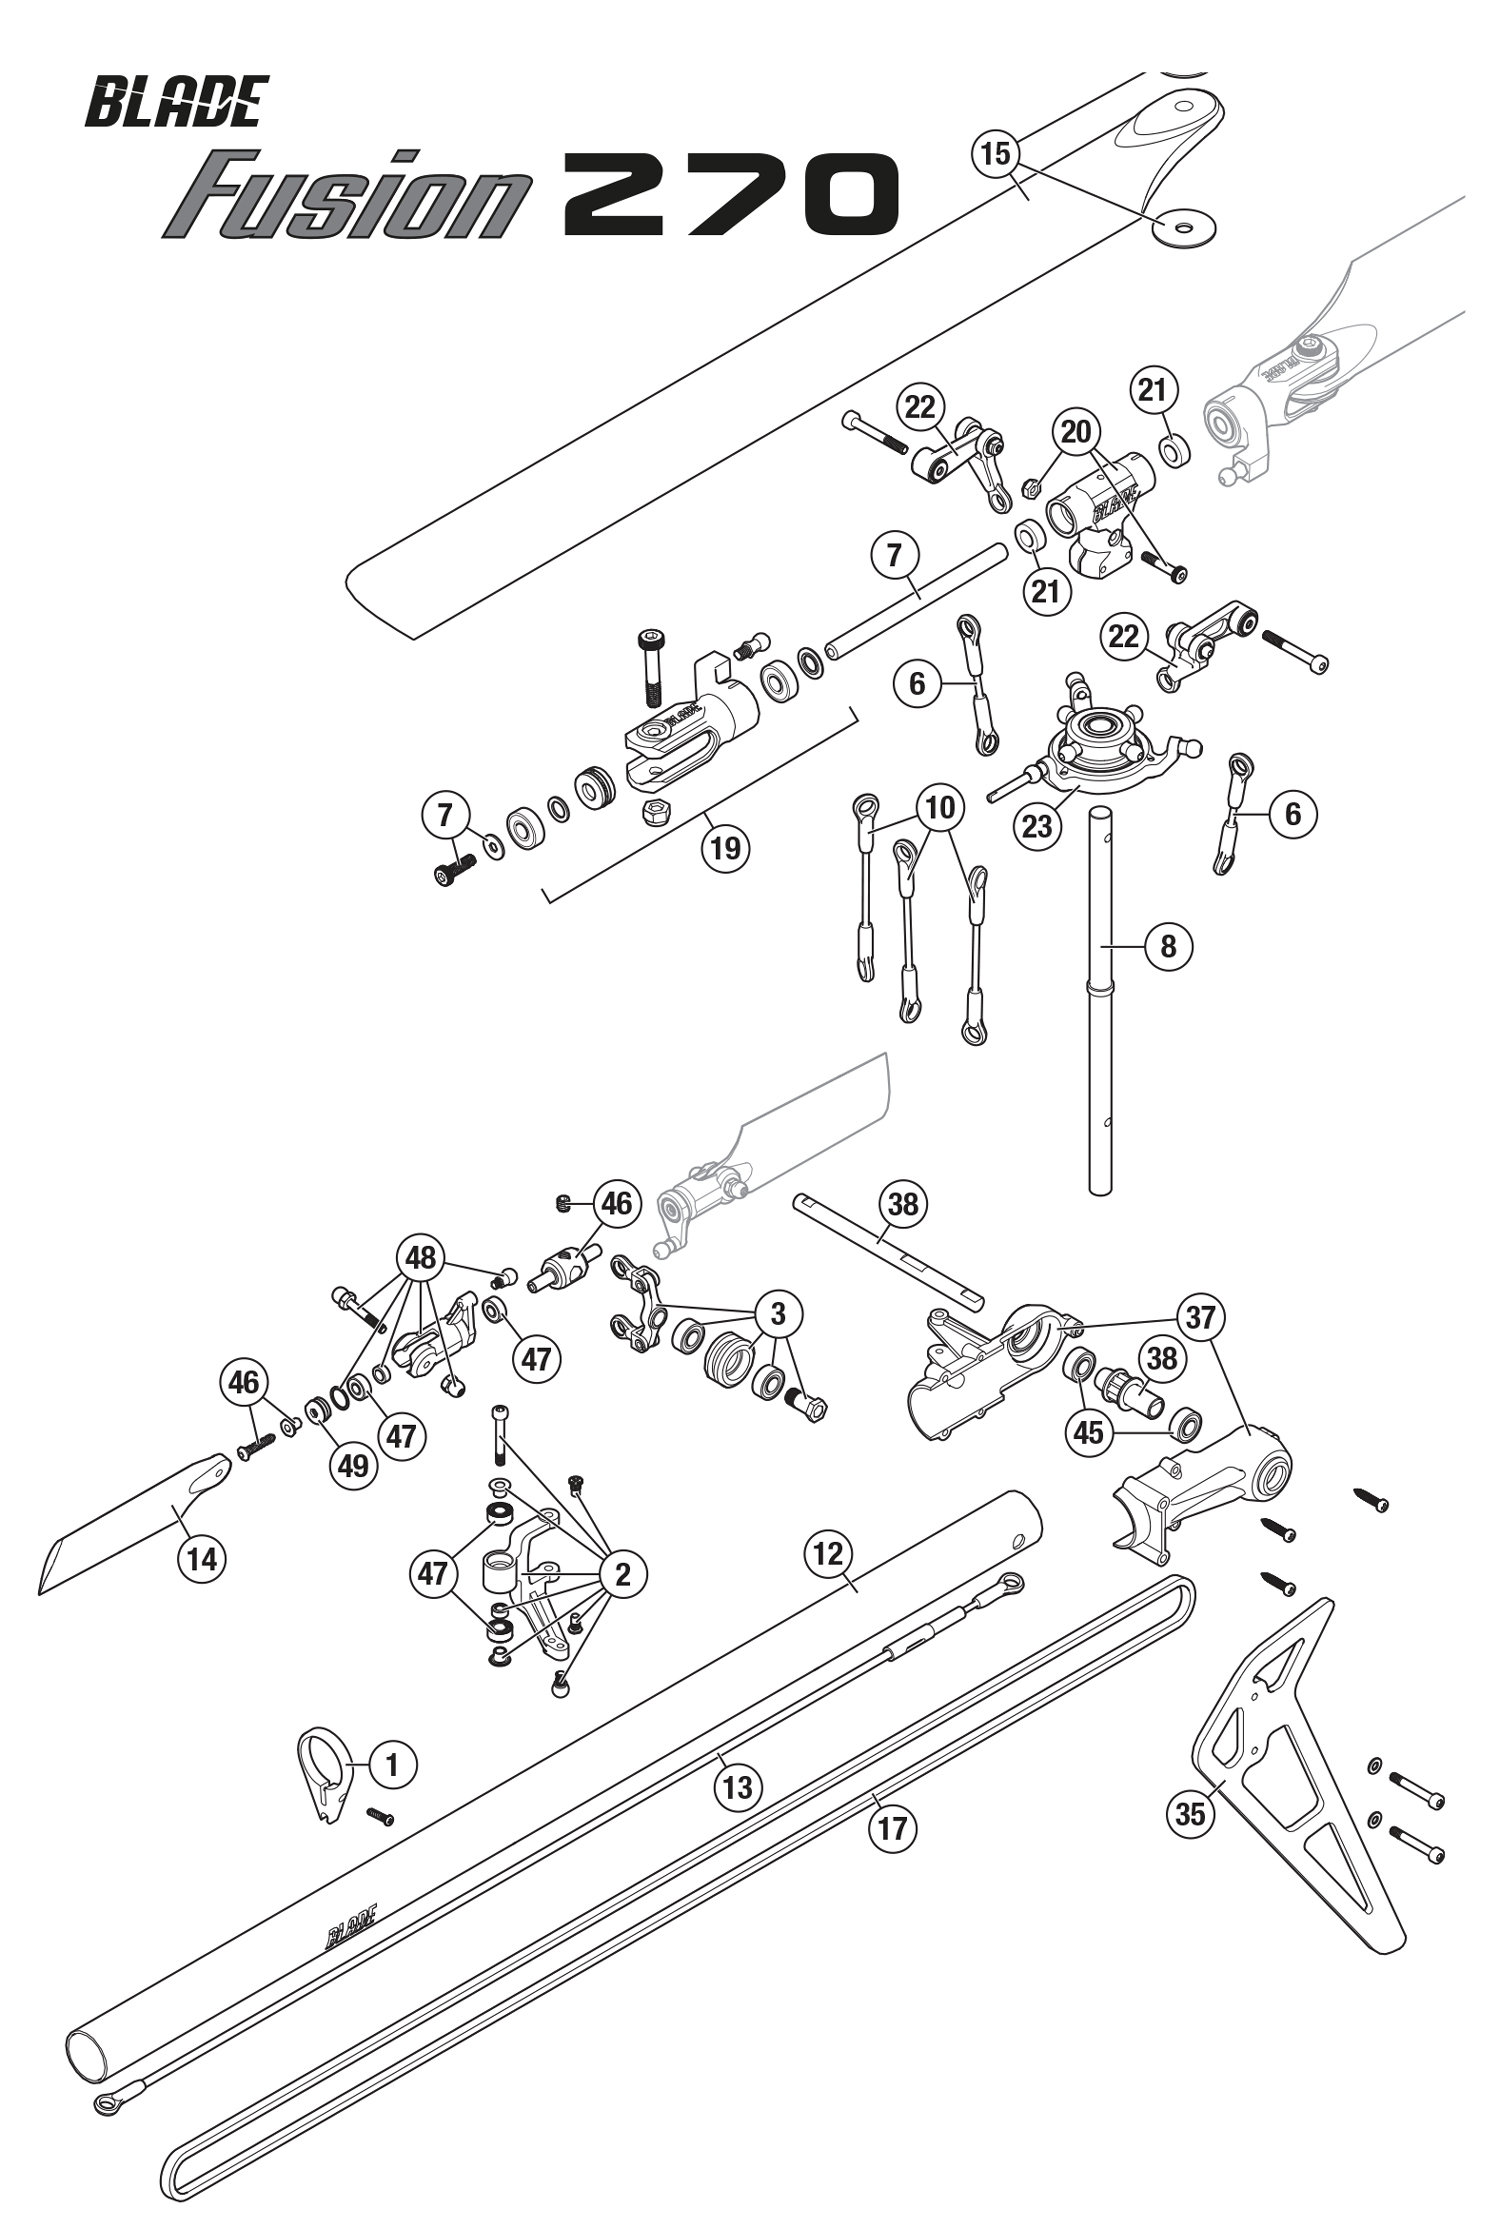 Exploded view